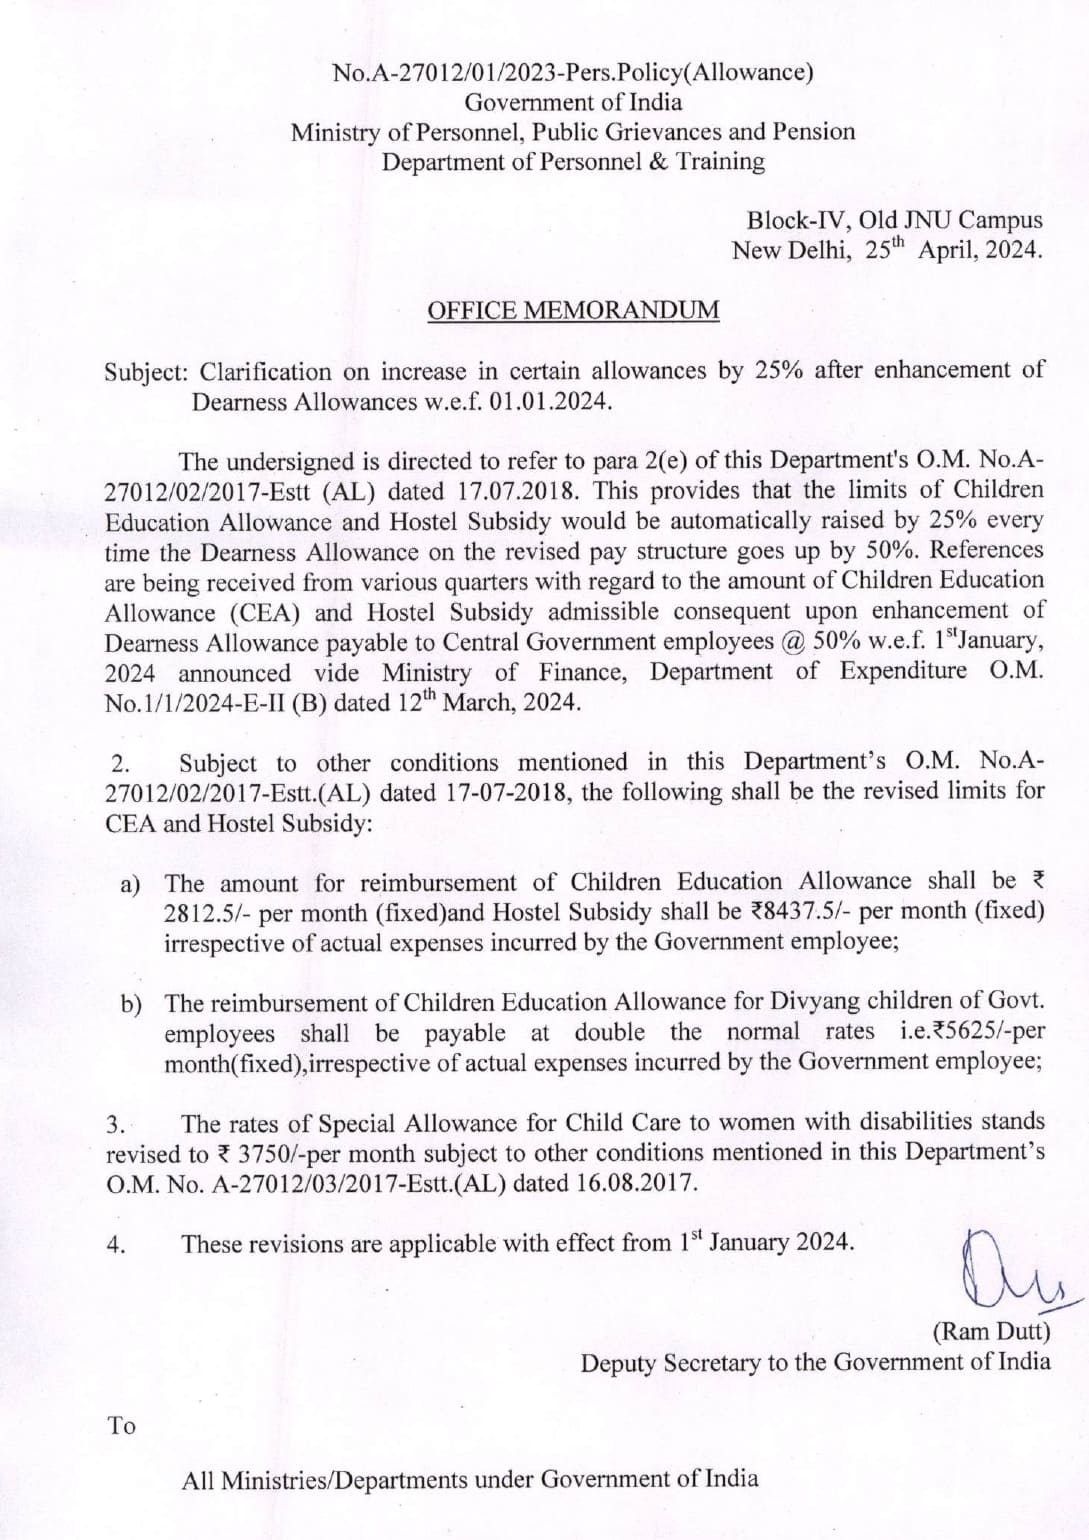 Increase in certain allowances by 25% after enhancement of Dearness Allowances w.e.f. 01.01.2024 – Clarification by DoPT